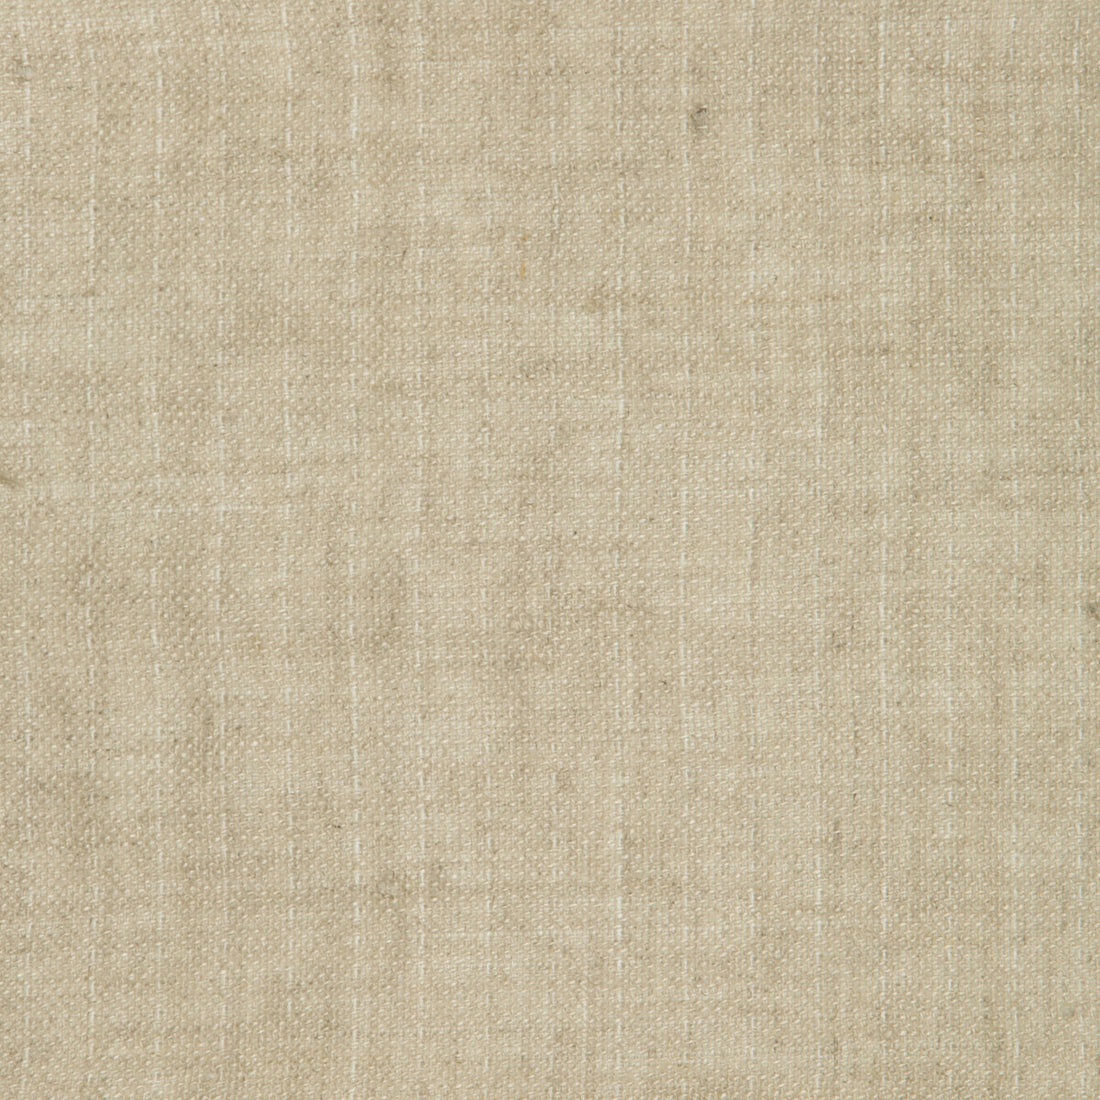 Temescal fabric in linen color - pattern 4547.16.0 - by Kravet Basics in the Jeffrey Alan Marks Oceanview collection